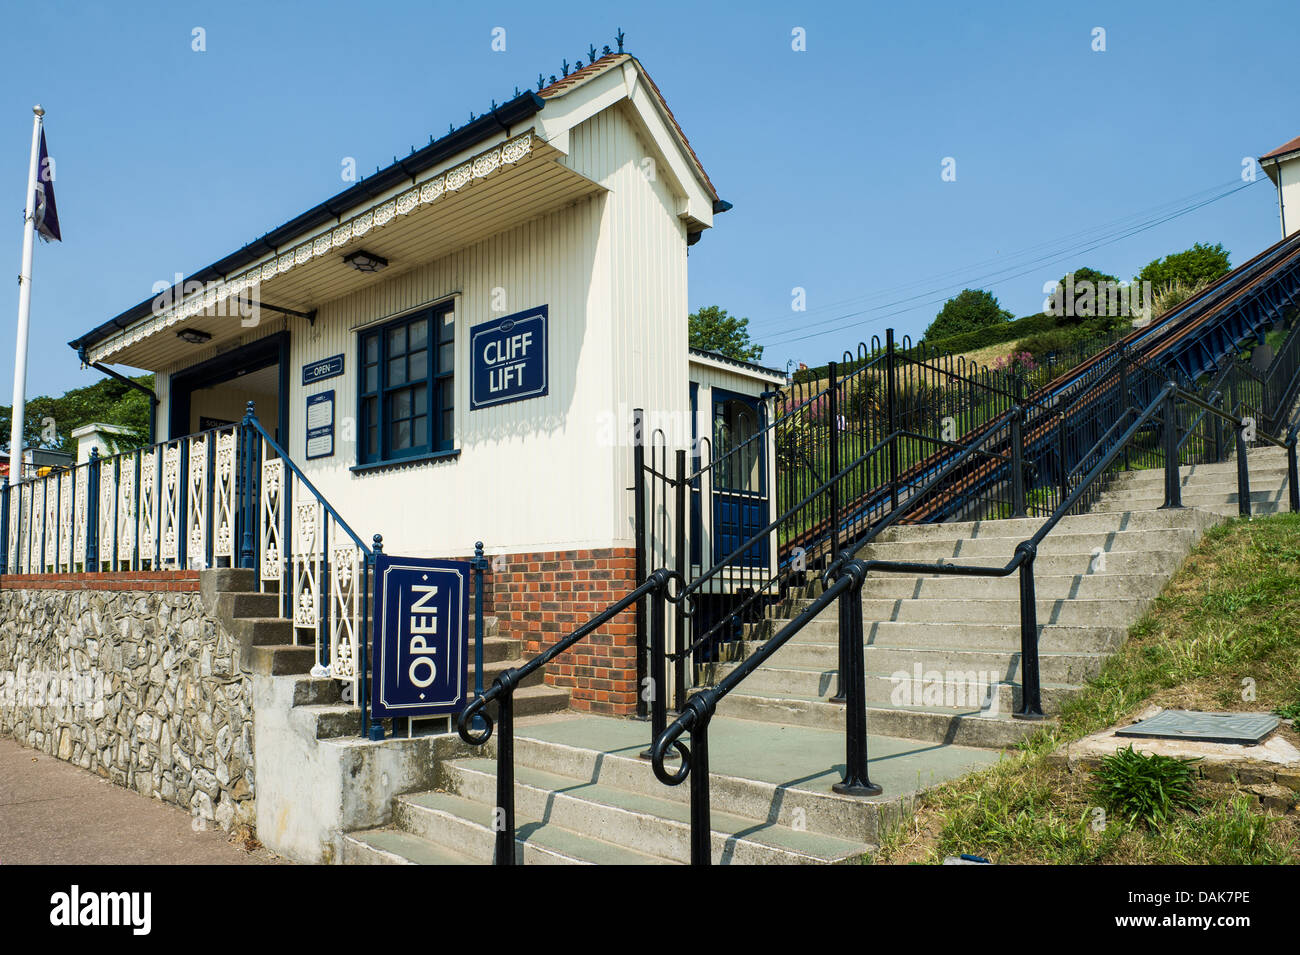 The cliff lift, Southend on sea, Essex, UK. Stock Photo